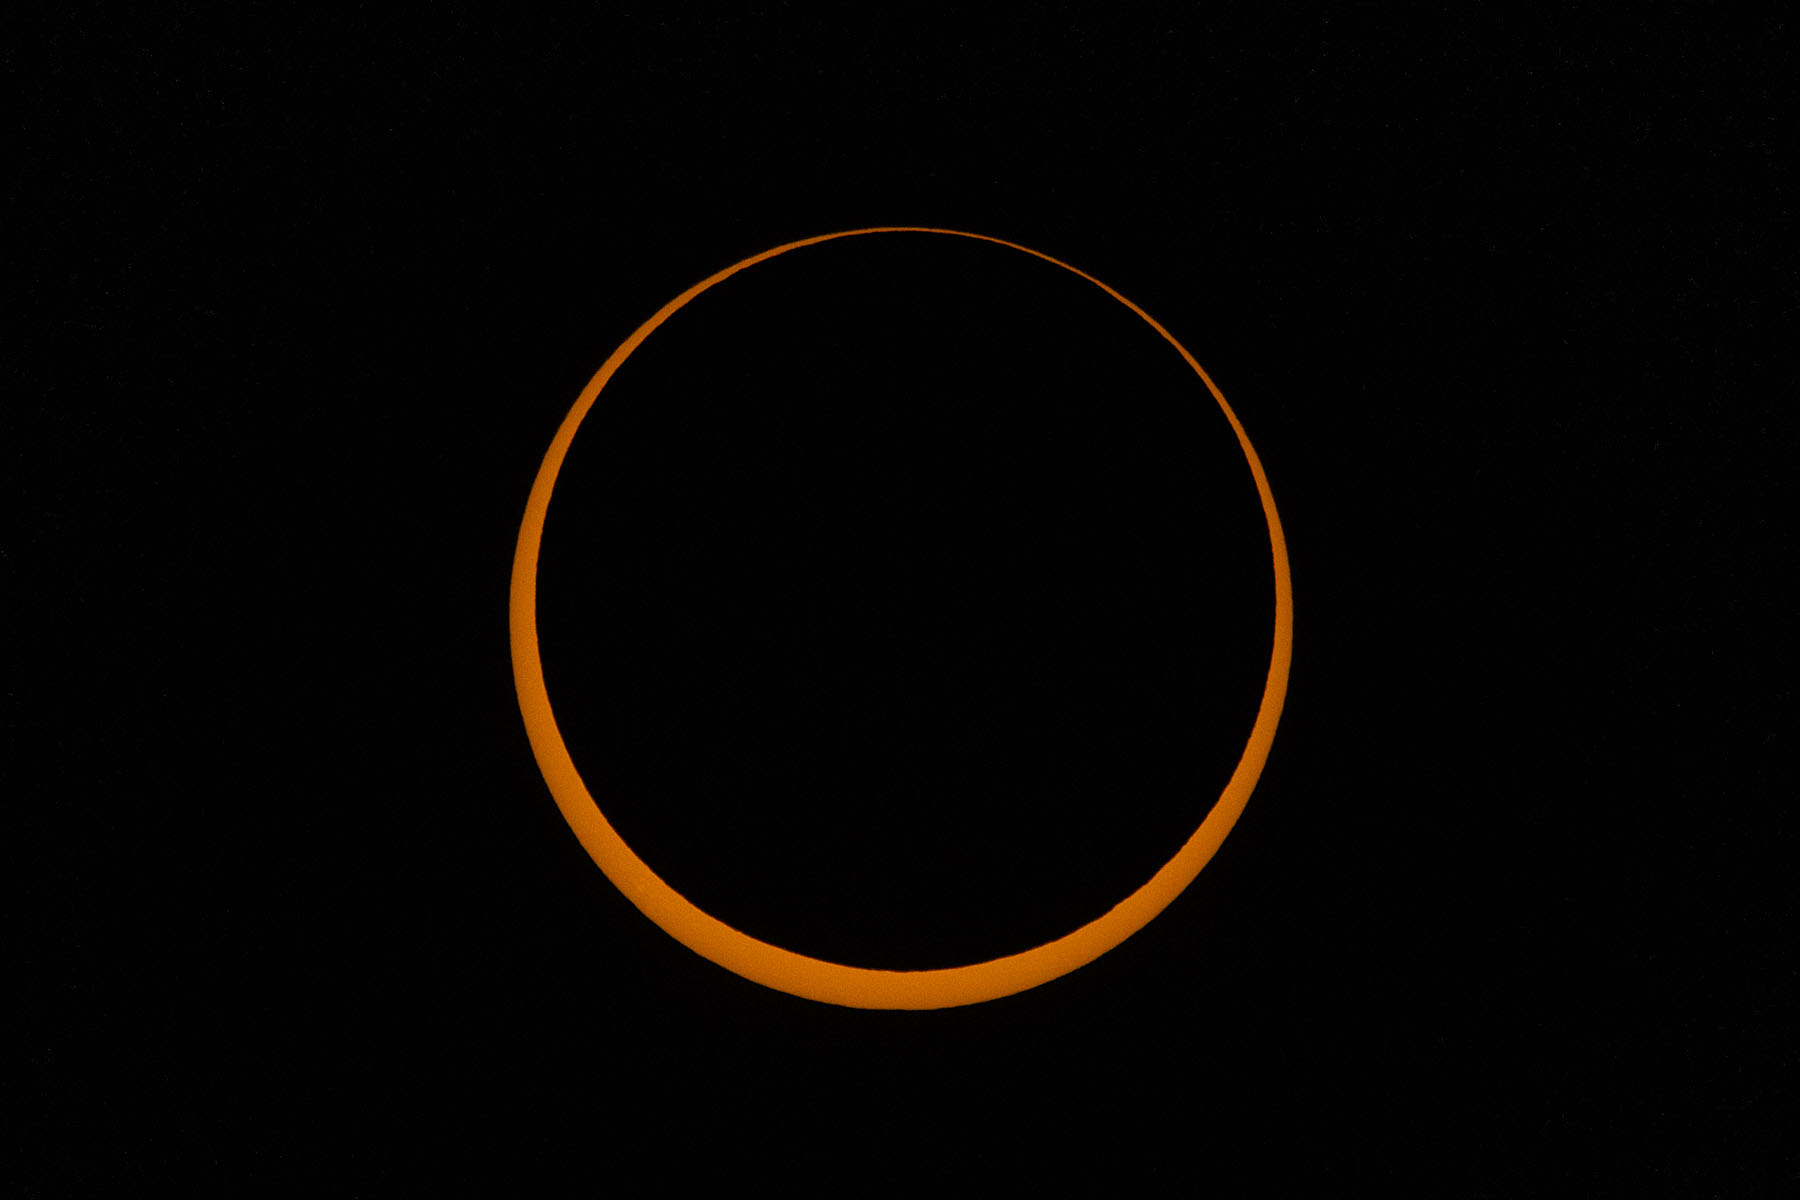 Annular solar eclipse, two minutes before peak, film solar filter on 100-400mm camera lens, 1.4x extender, Canon R10 camera.  Click for next photo.